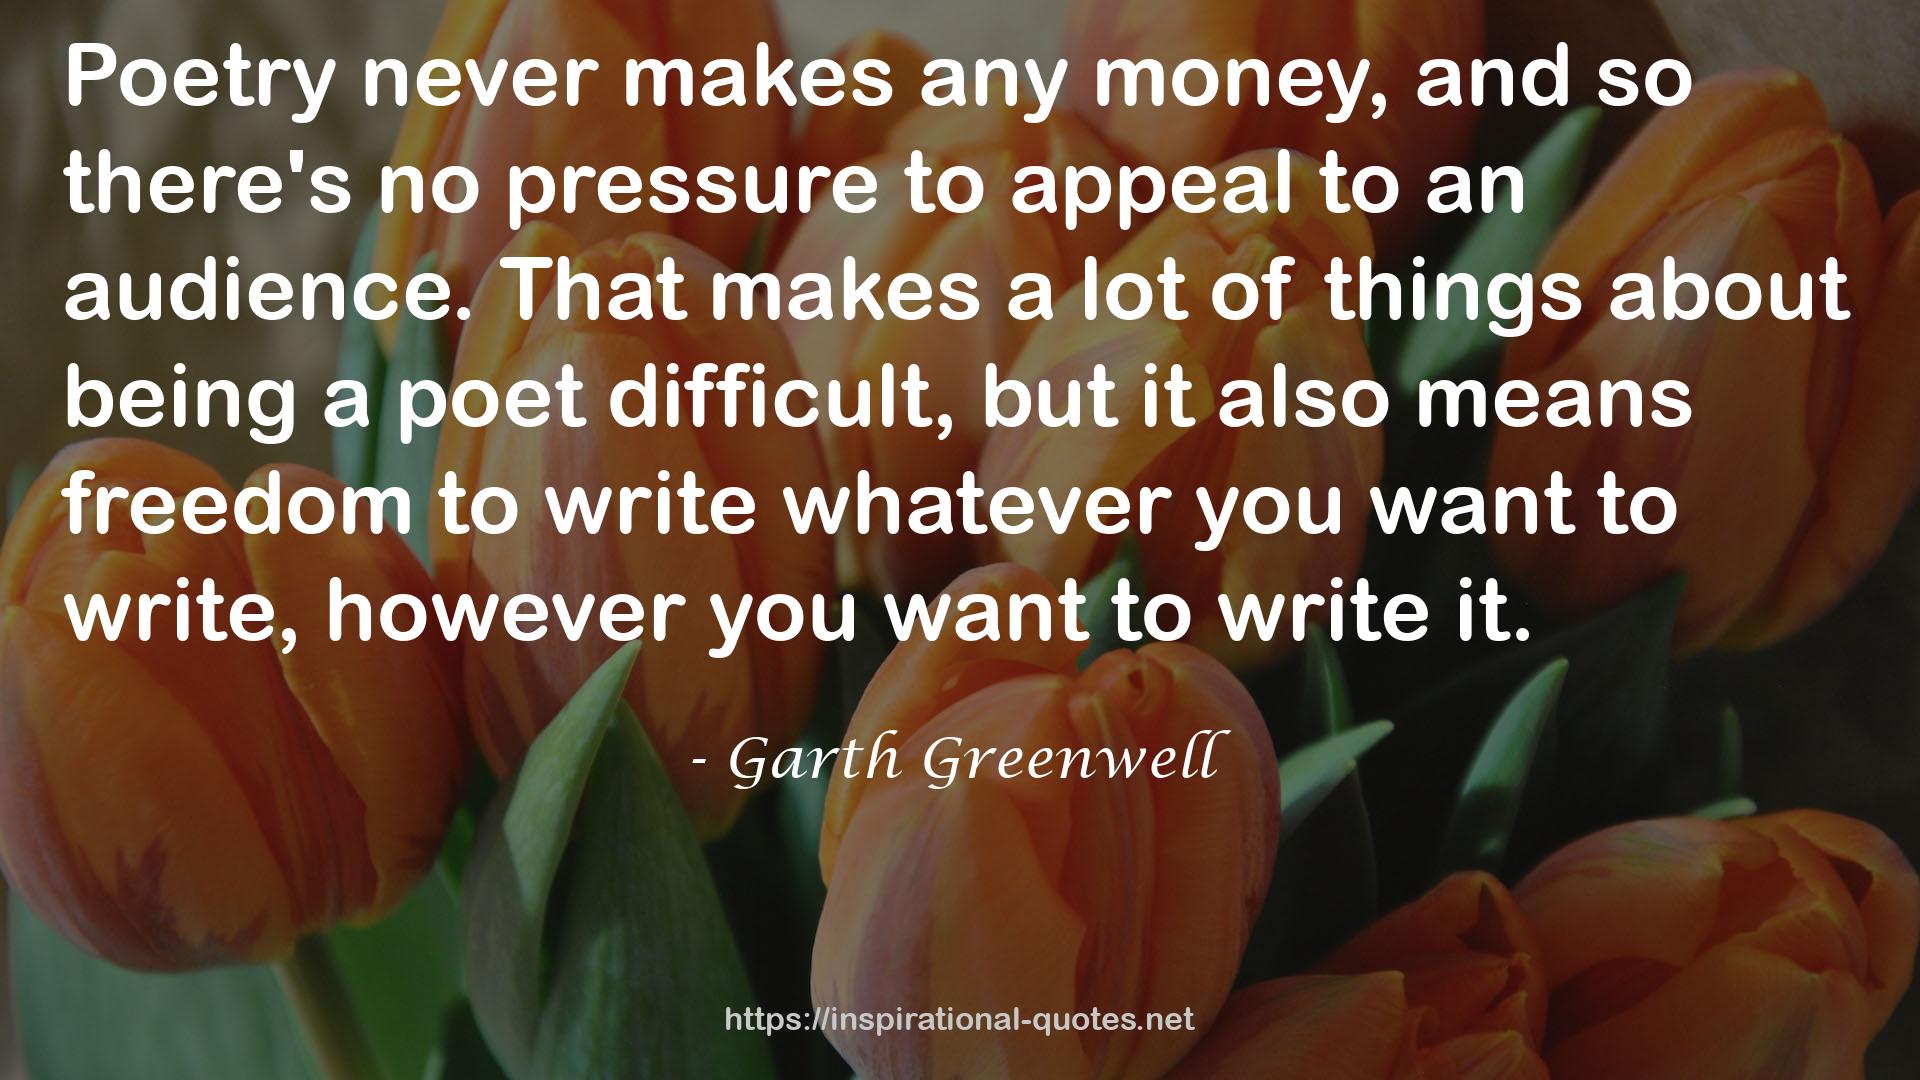 Garth Greenwell QUOTES